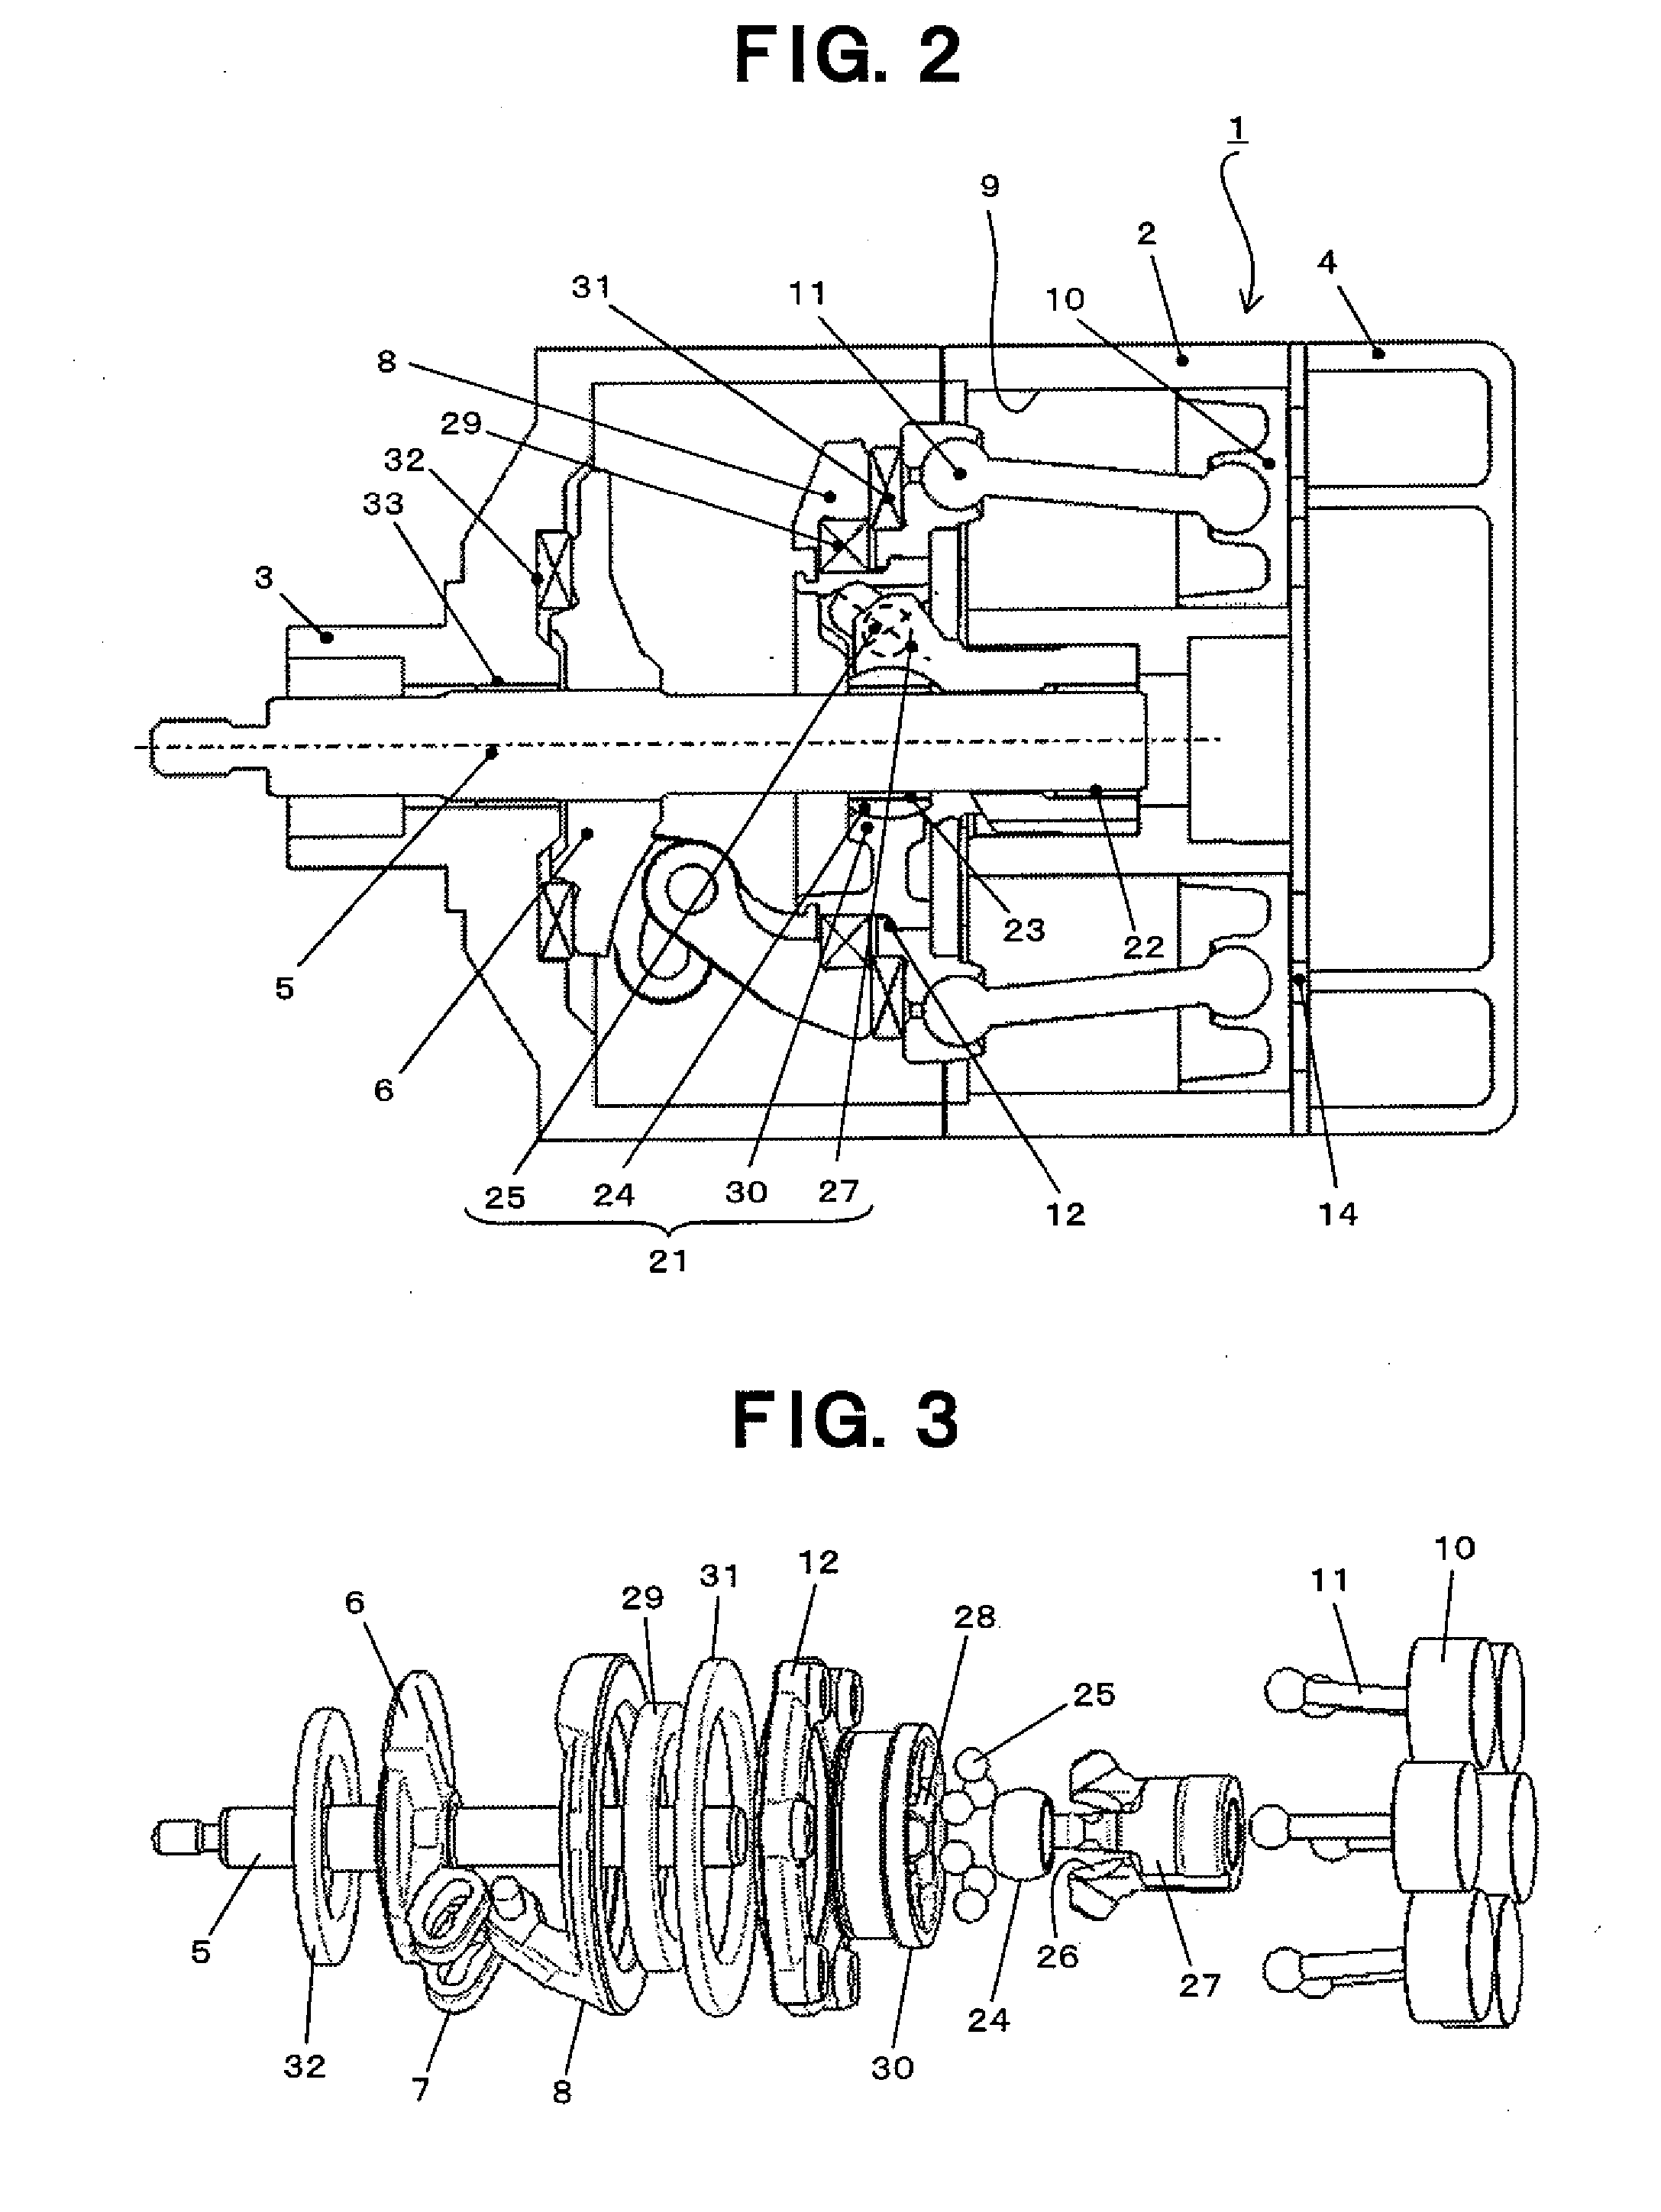 Wobble Plate-Type Variable Displacement Compressor